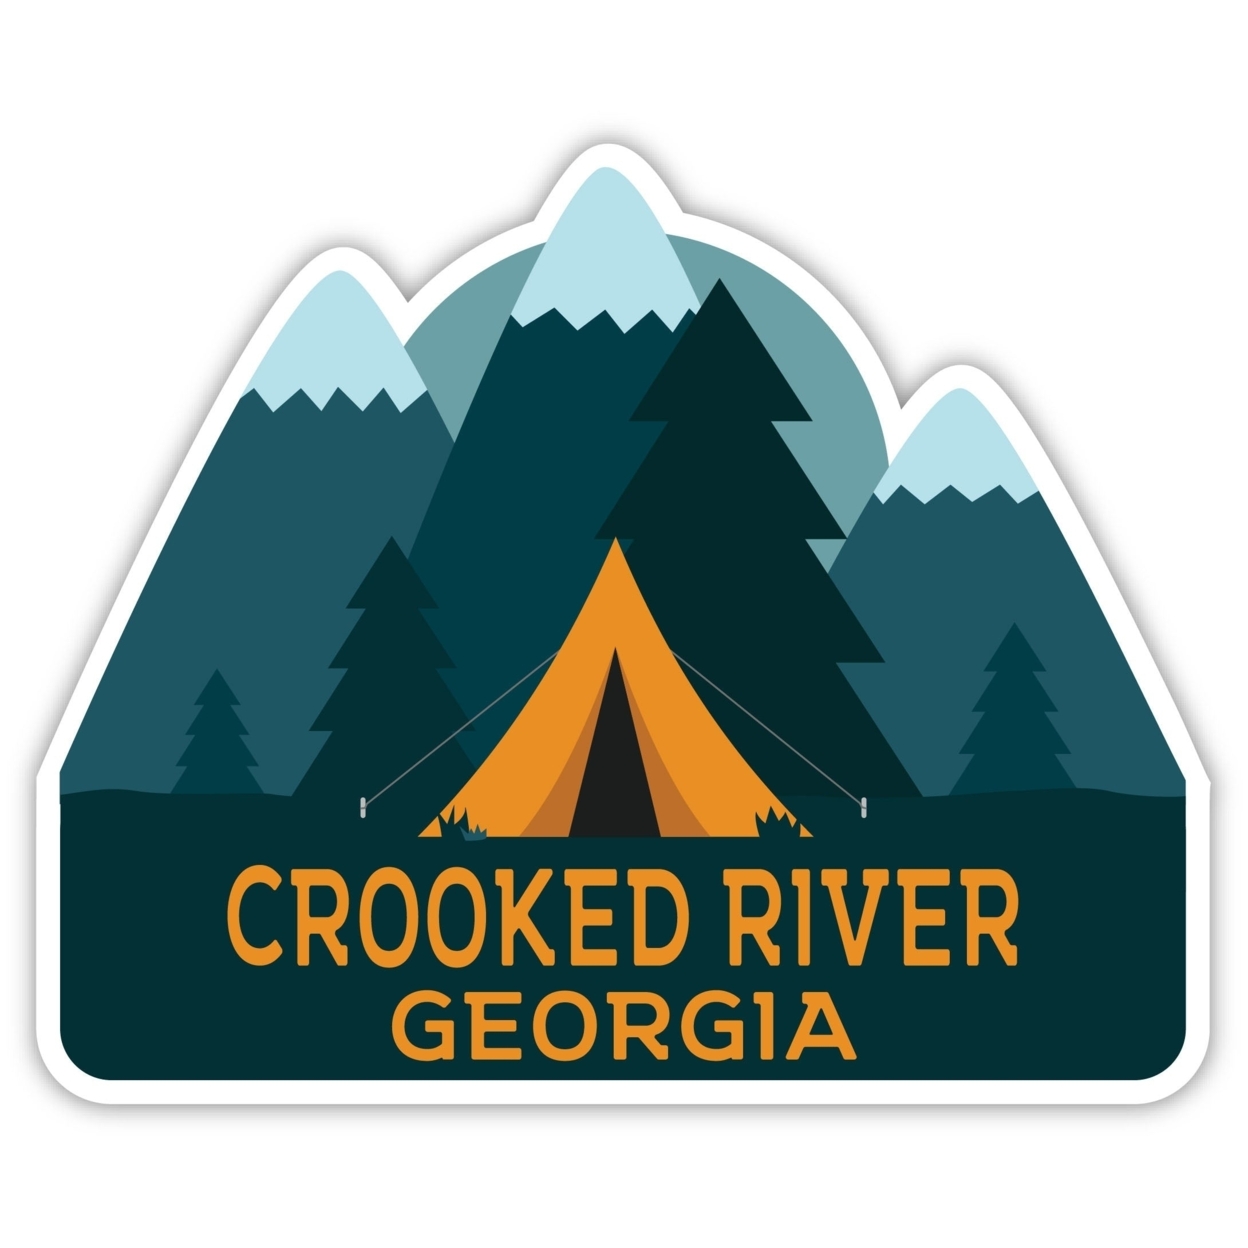 Crooked River Georgia Souvenir Decorative Stickers (Choose Theme And Size) - 4-Pack, 8-Inch, Tent